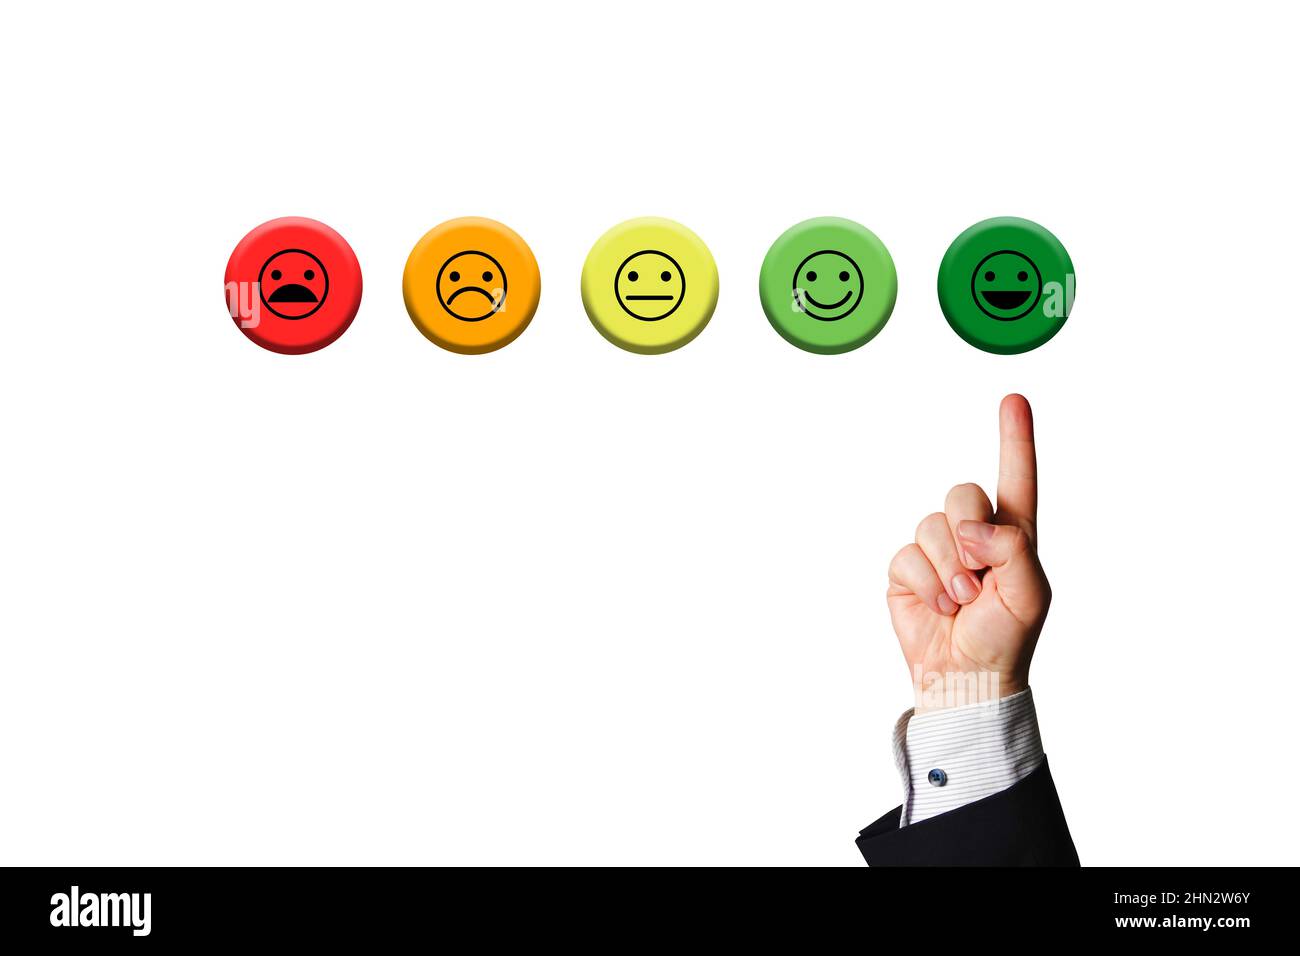 Customer or Employee or Stakeholder Stausfaction. Five smileys with green smiley pointed at by businessman's hand, symbolizing a goal or achievement. Stock Photo